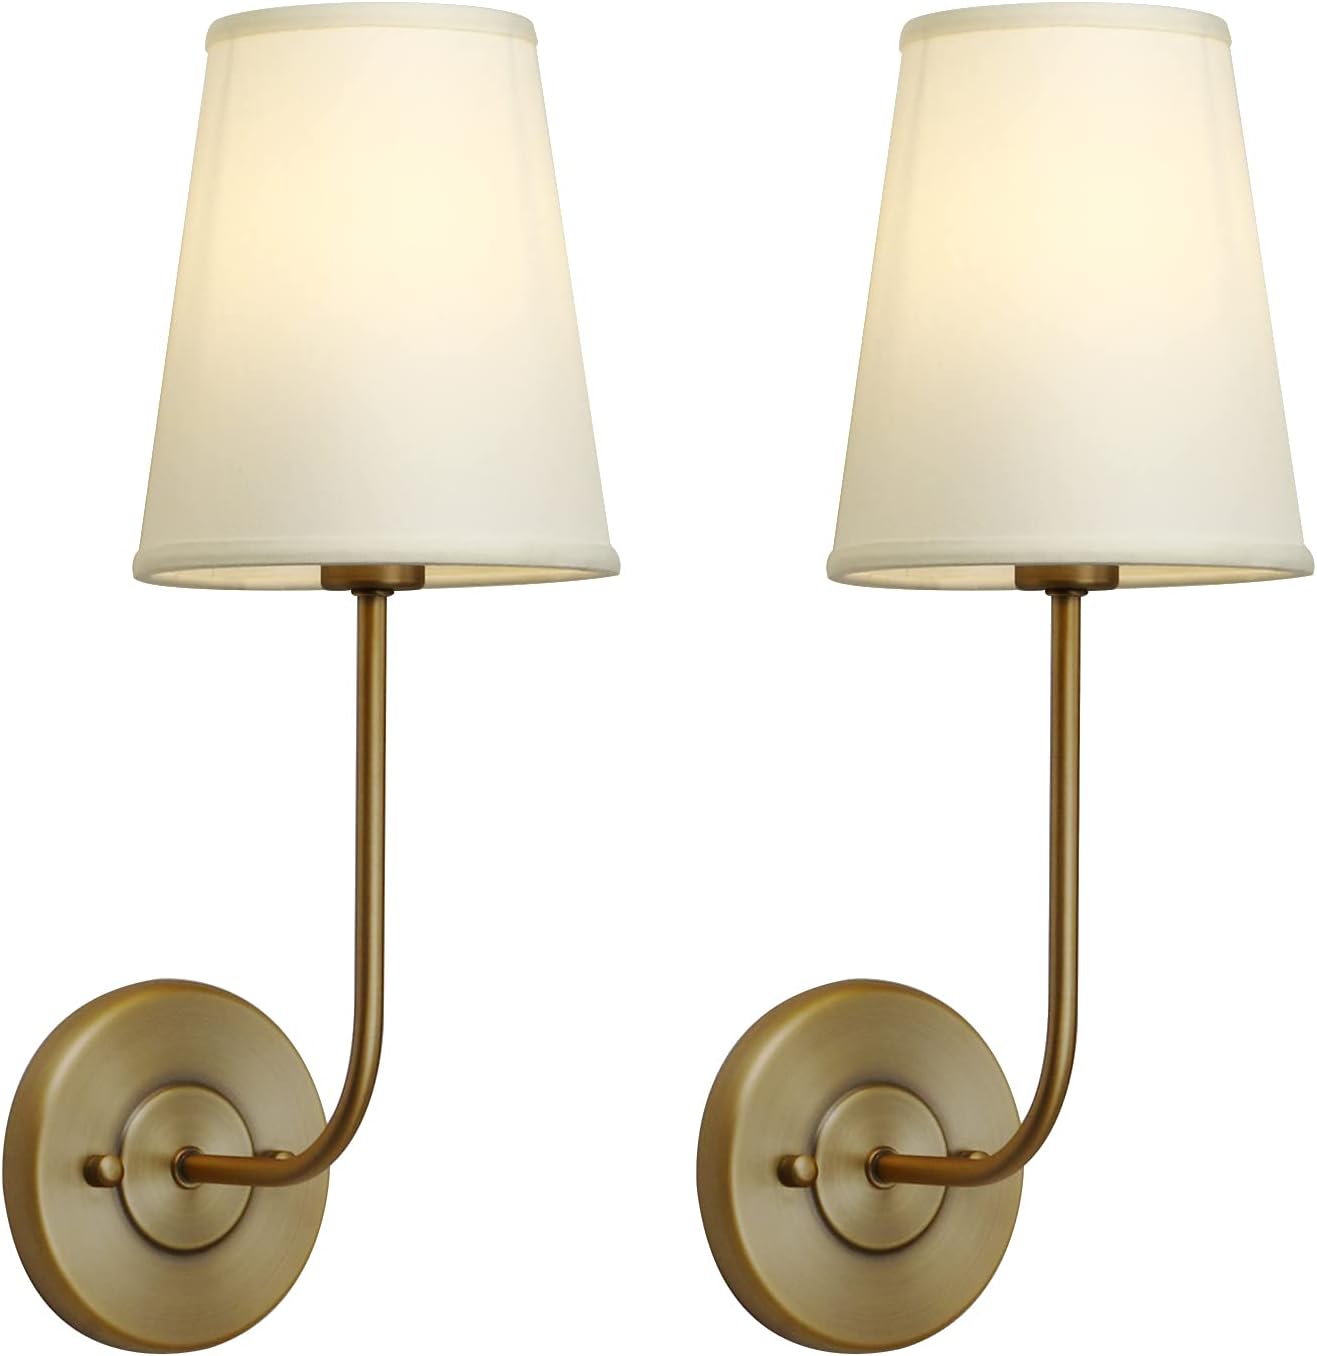 antique wall sconces living room